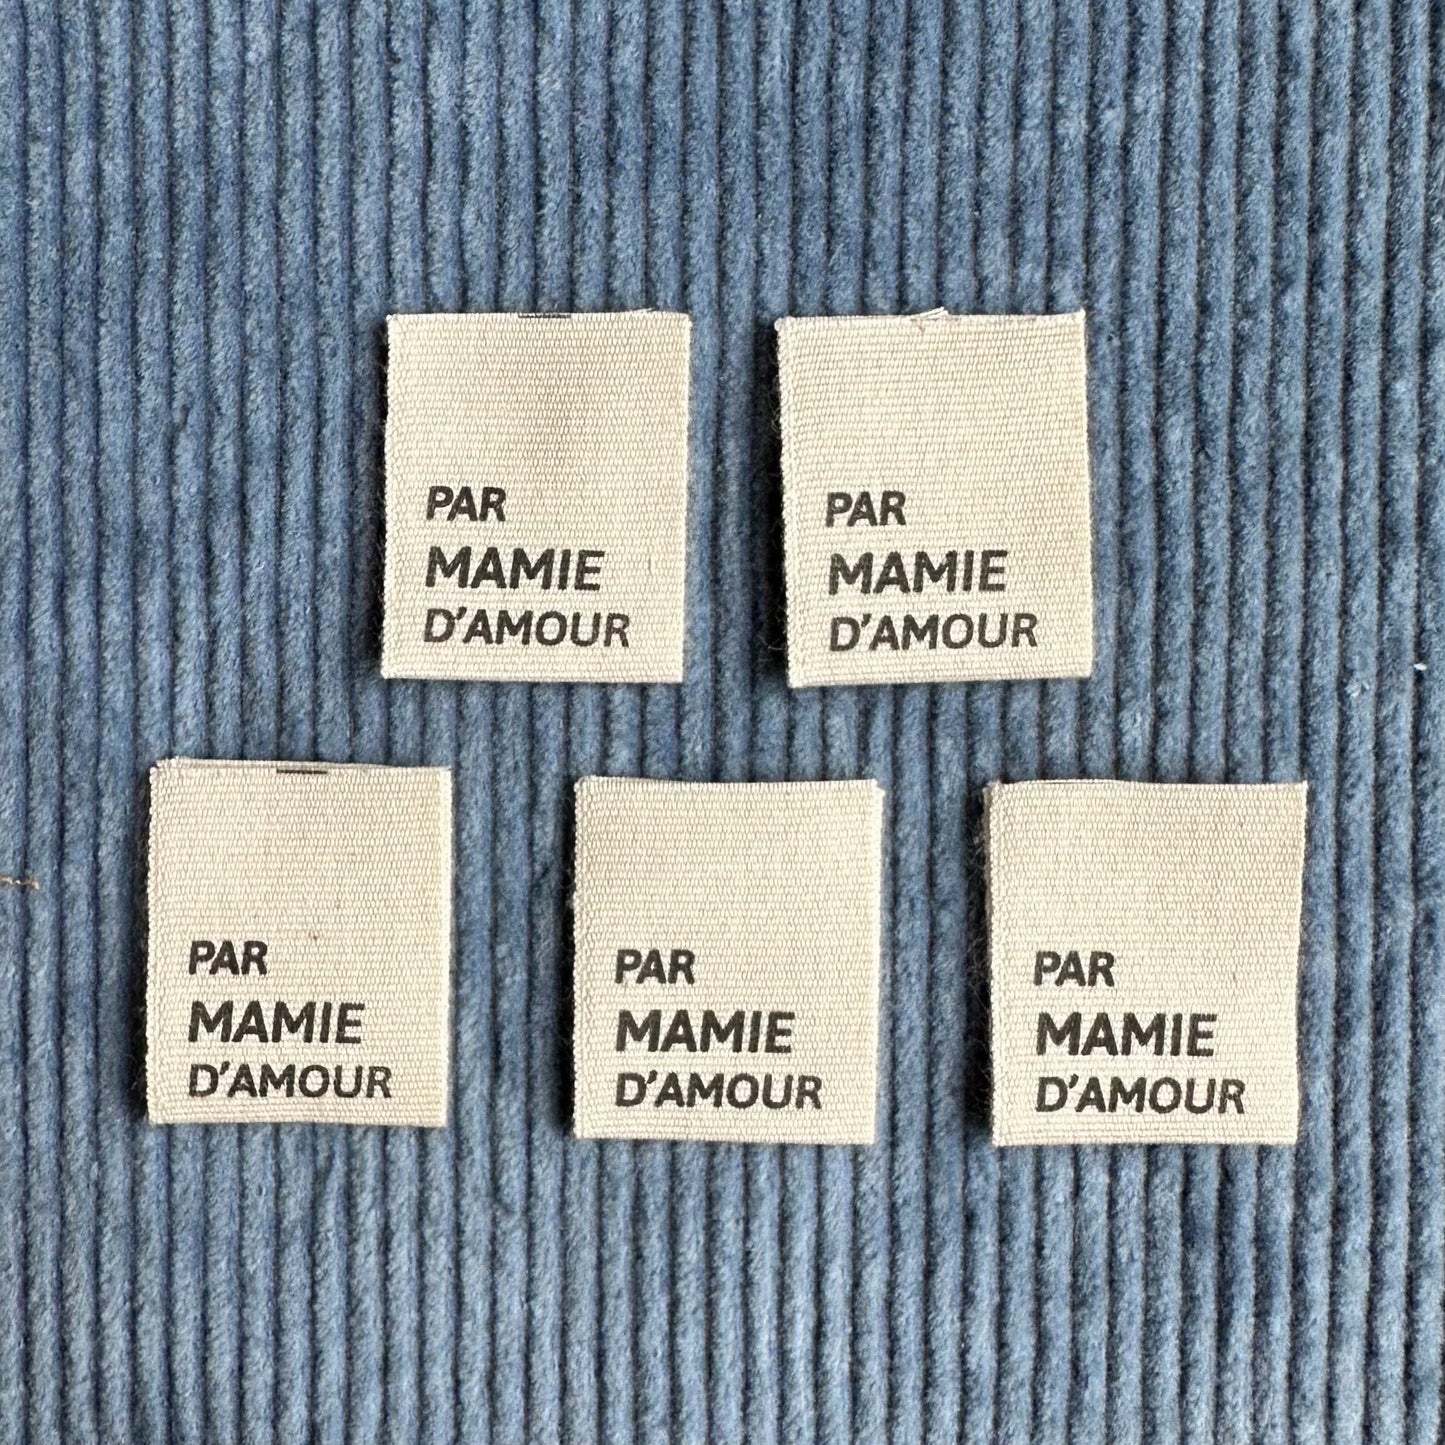 BY MAMIE D'AMOUR - Cotton labels in French